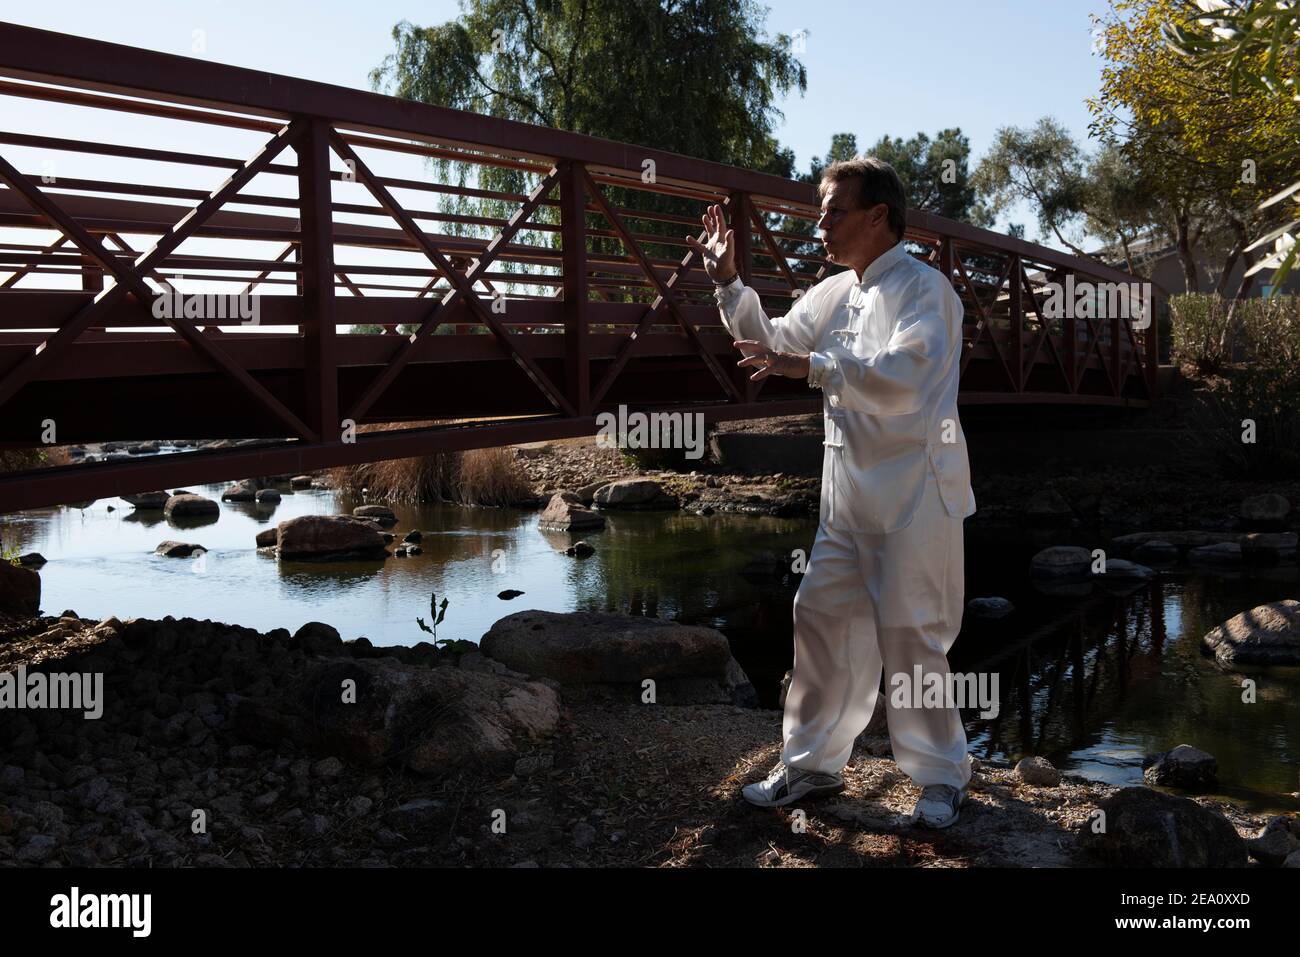 Man wearing a white suit and performs Tai Chi on a rock in an outdoor setting with a metal bridge behind him and water in background. Stock Photo